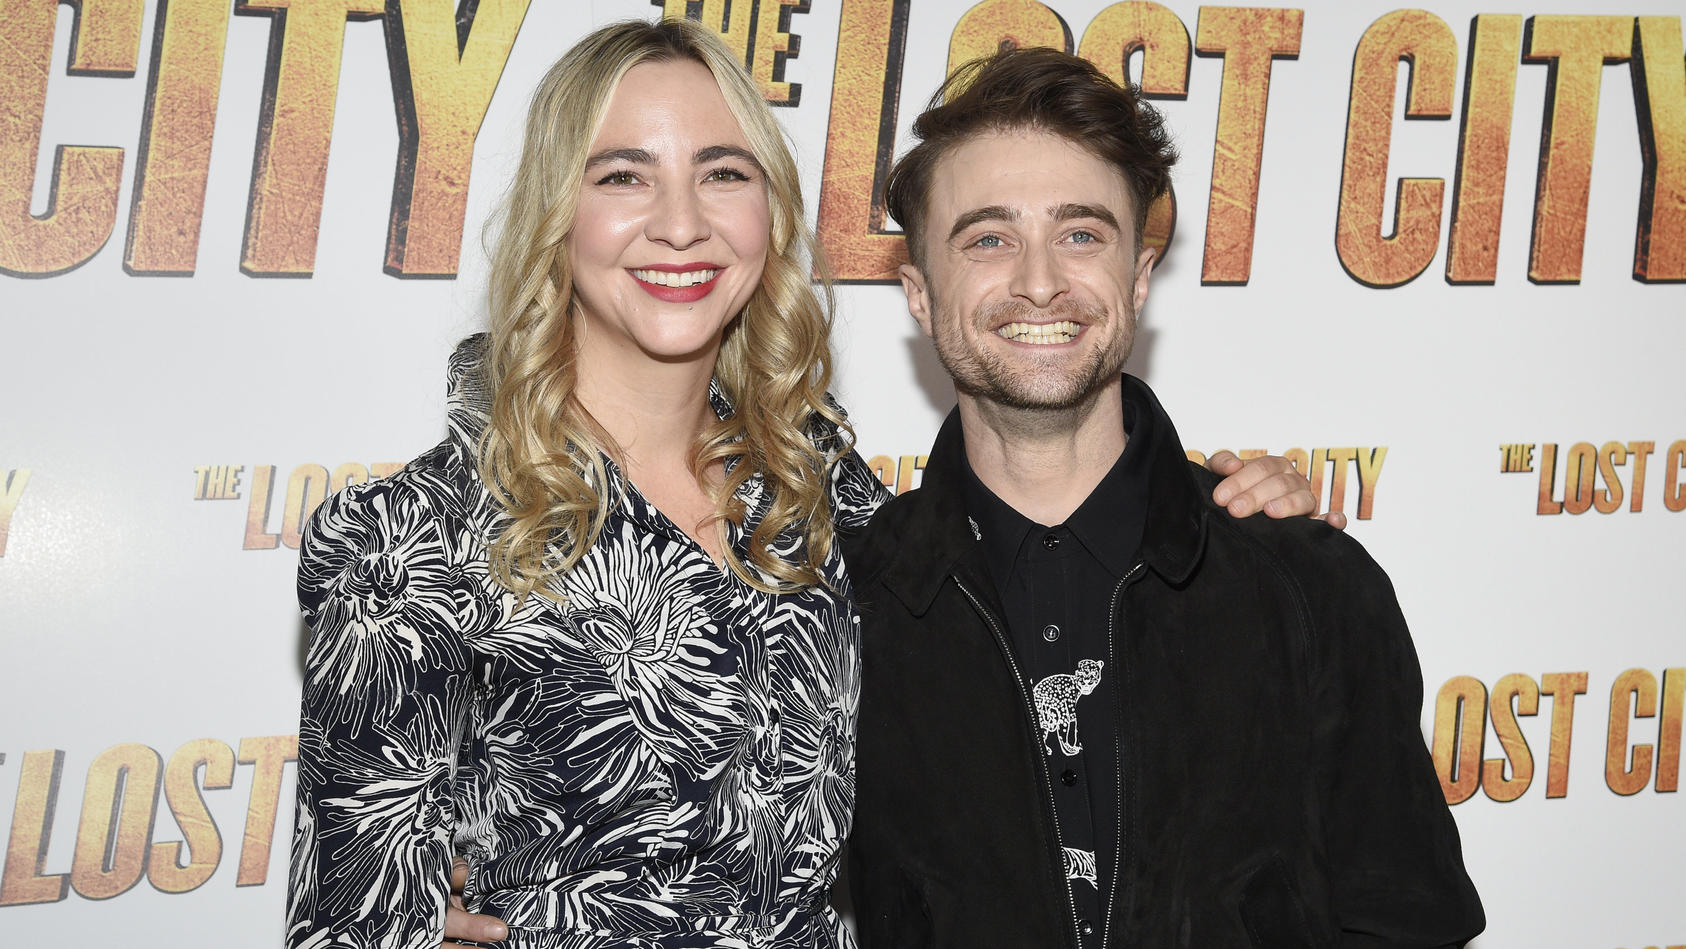 Actors Daniel Radcliffe, right, and girlfriend Erin Darke attend the special screening of "The Lost City," at The Whitby Hotel on Monday, March 14, 2022, in New York. (Photo by Evan Agostini/Invision/AP)